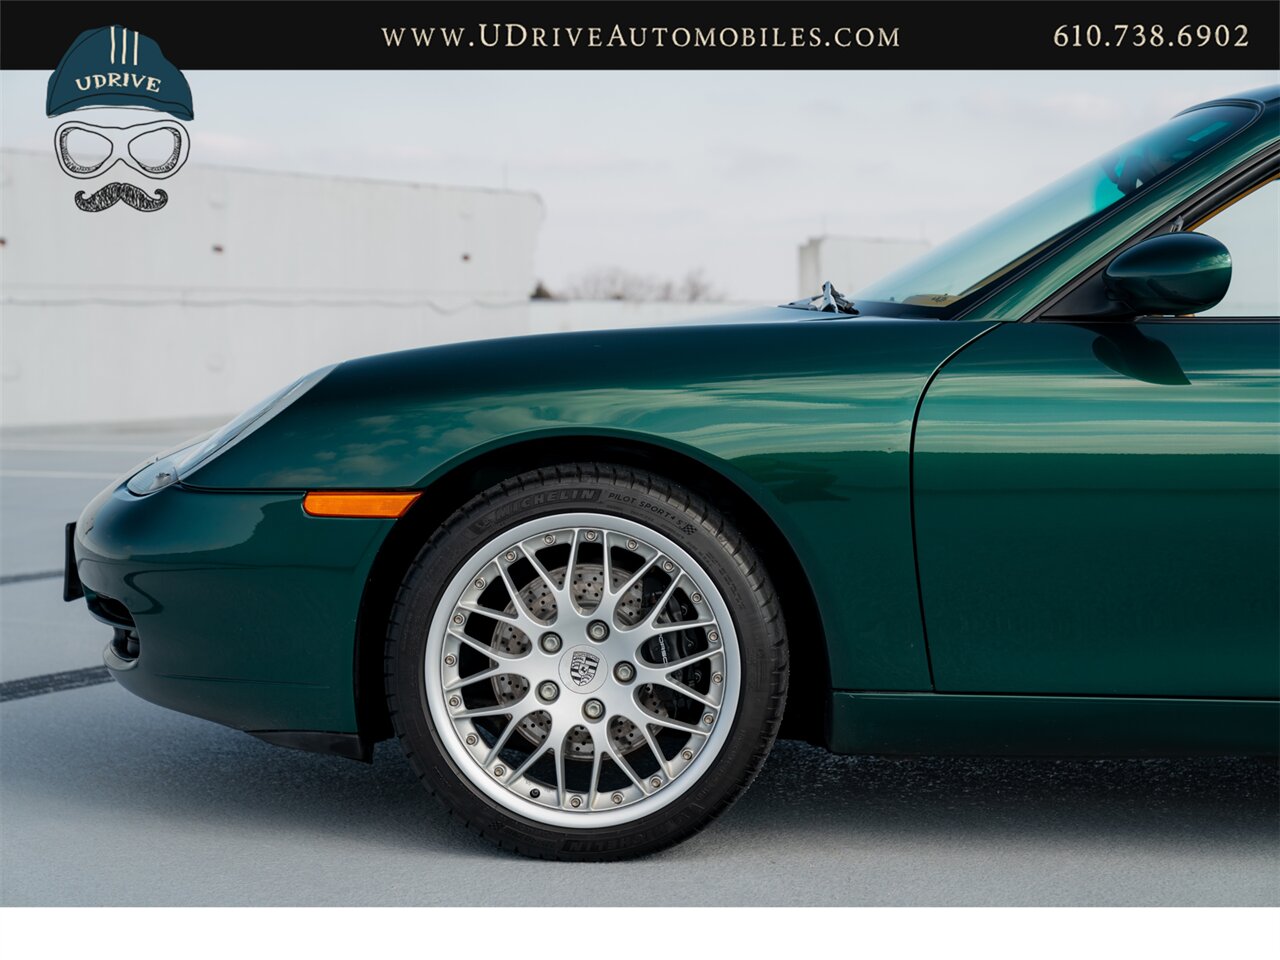 2001 Porsche 911 Carrera 996 Coupe 6 Speed Rare Rain Forest Green  IMS Retrofit Detailed Service History - Photo 9 - West Chester, PA 19382